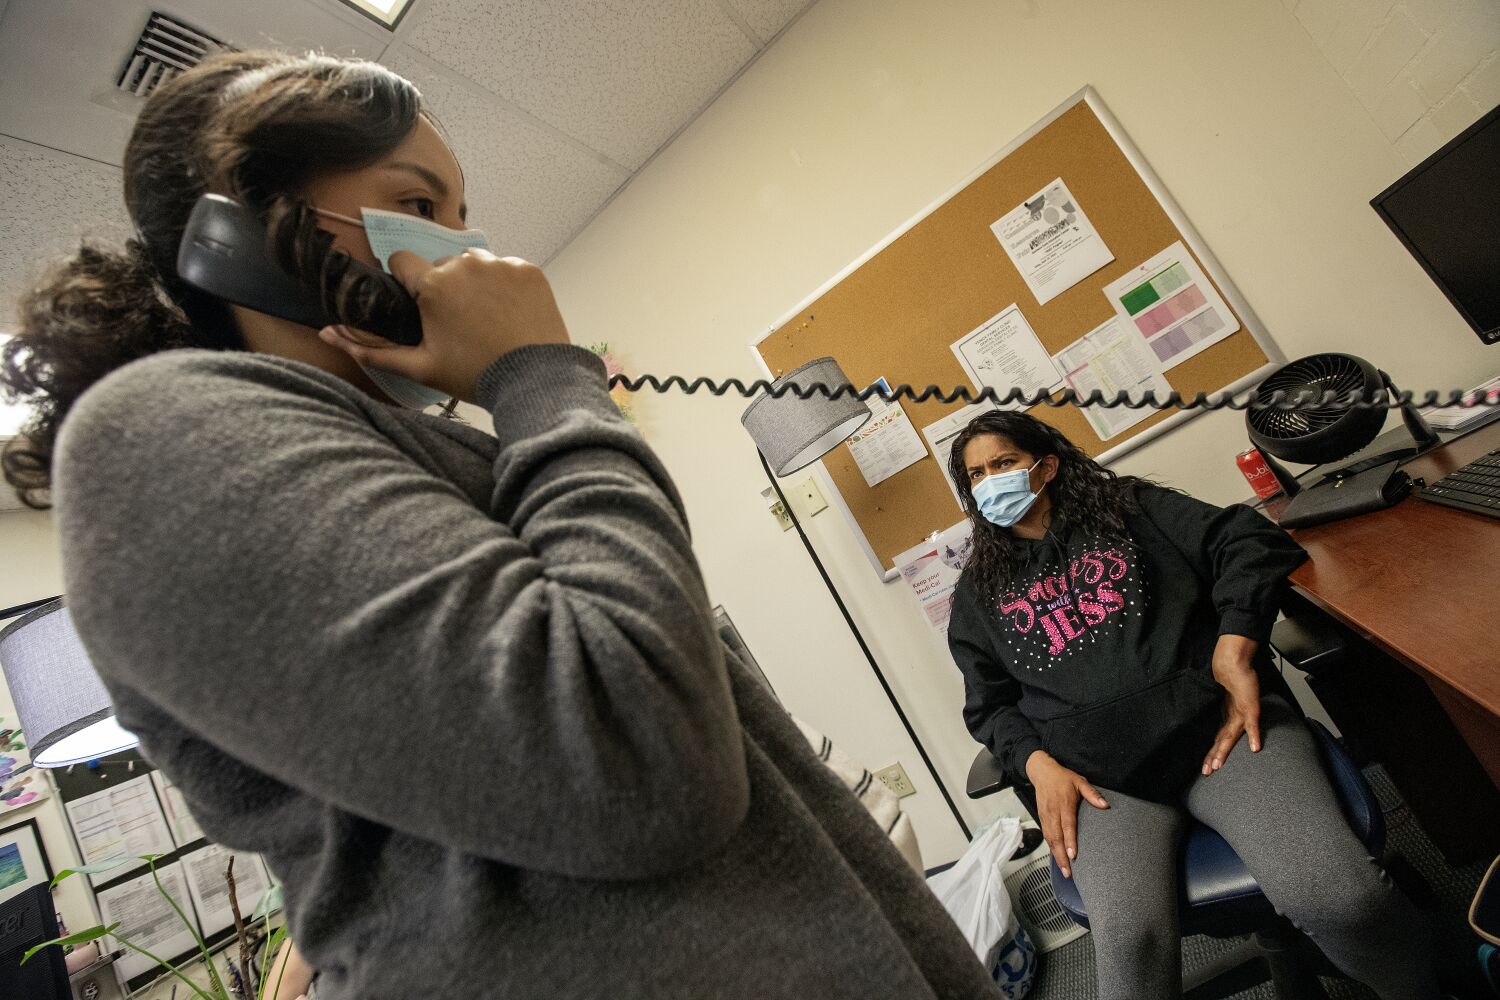 Tens of thousands of L.A. County residents could soon lose Medi-Cal coverage. Here's why